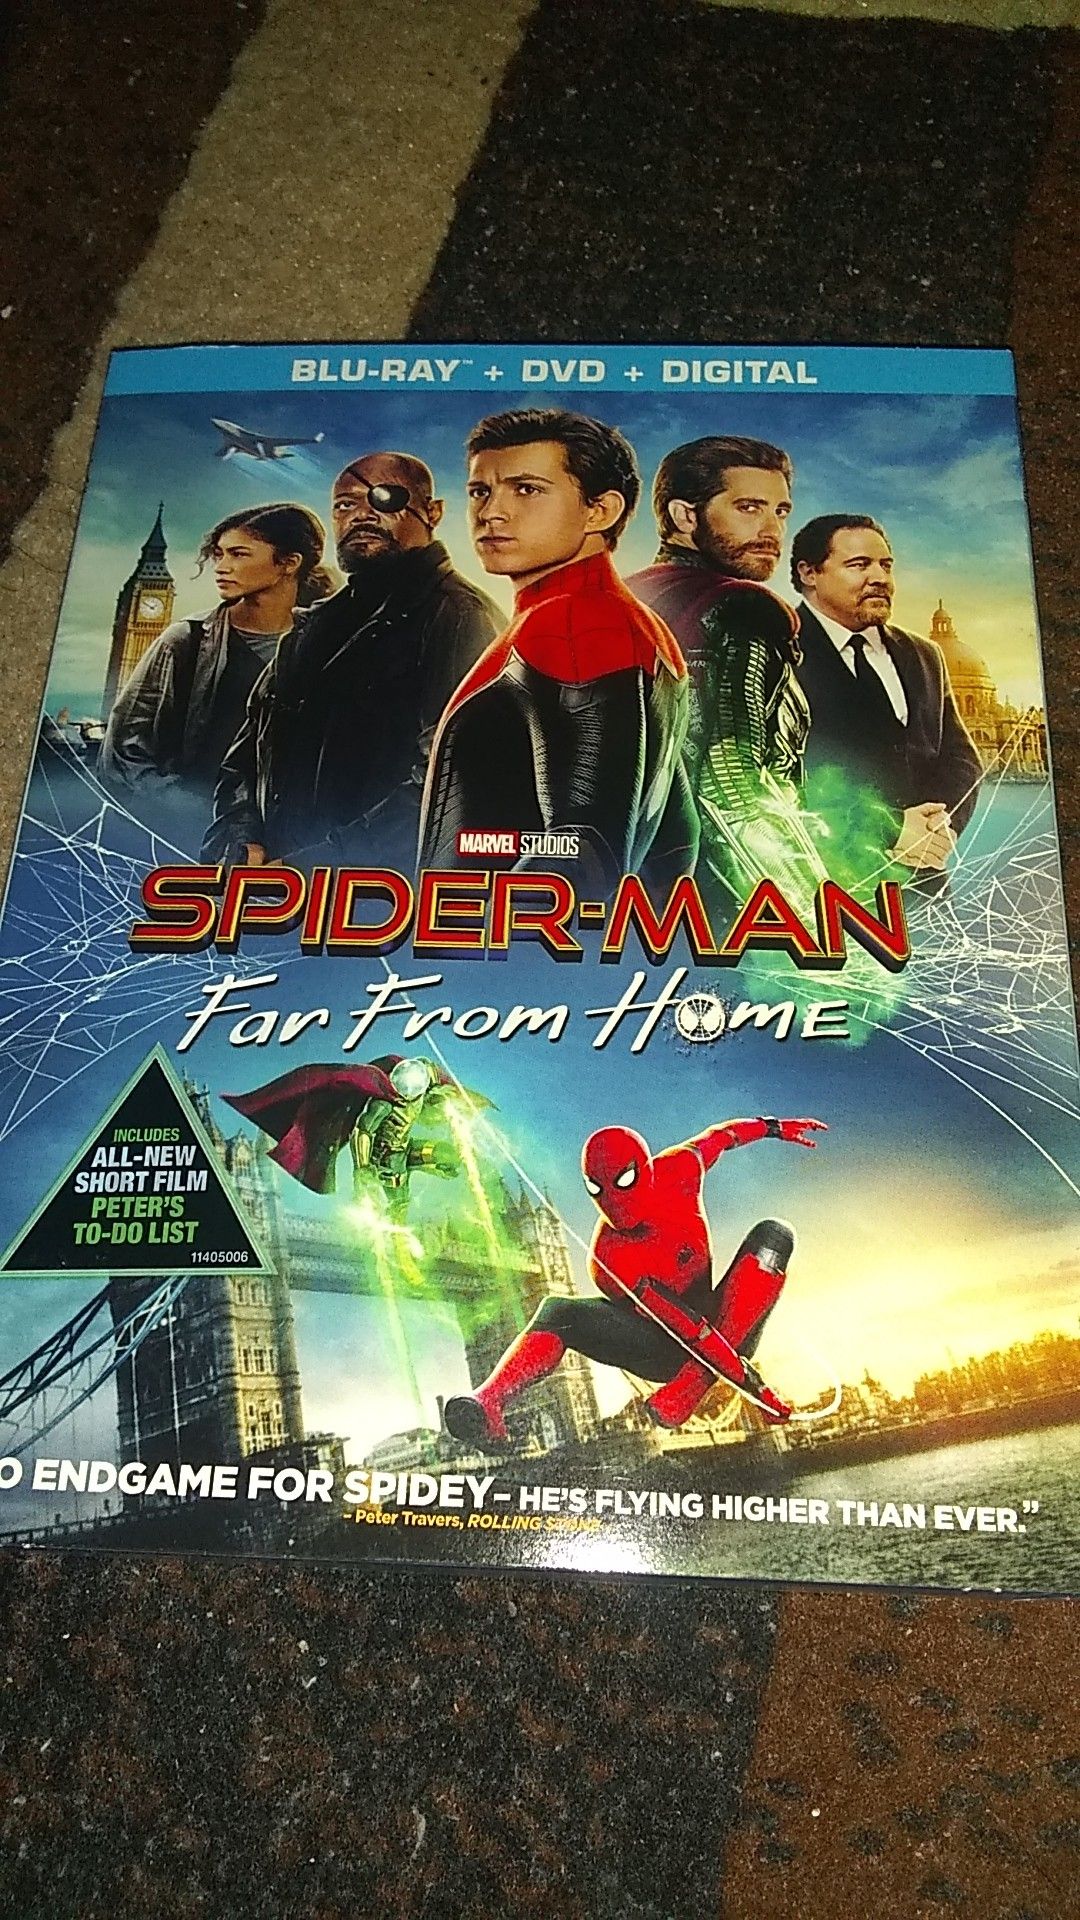 SPIDERMAN FAR FROM HOME , ON BLU-RAY BRAND NEW SEALED NEVER OPENED ASKING $12.00